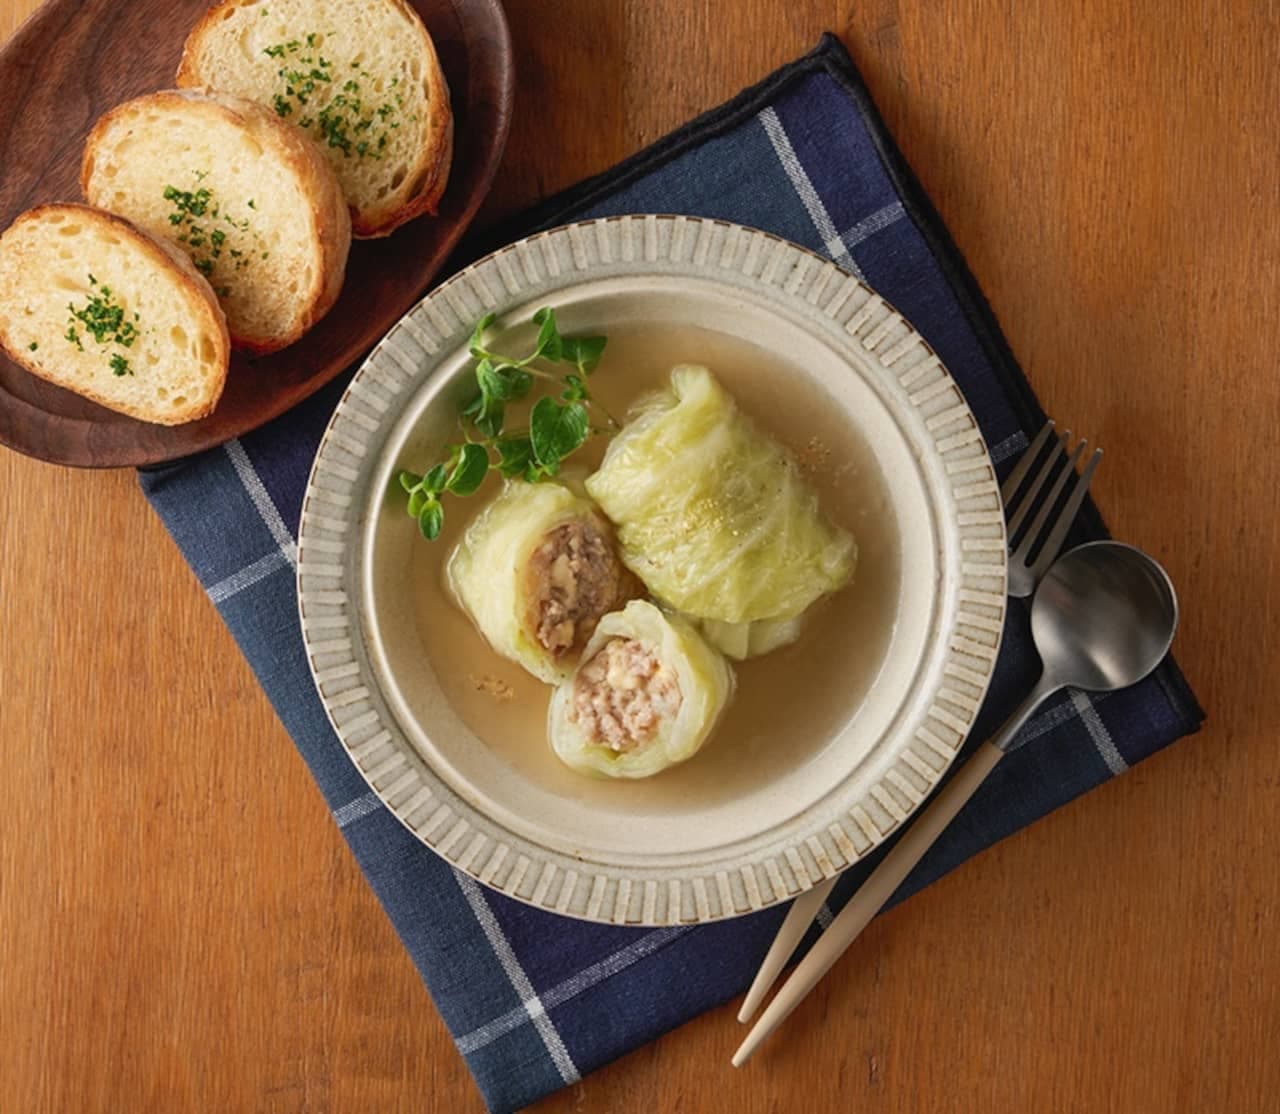 Denny's "Cheese in Cabbage Rolls in Soup - Consommé Style" - Sample of arrangement